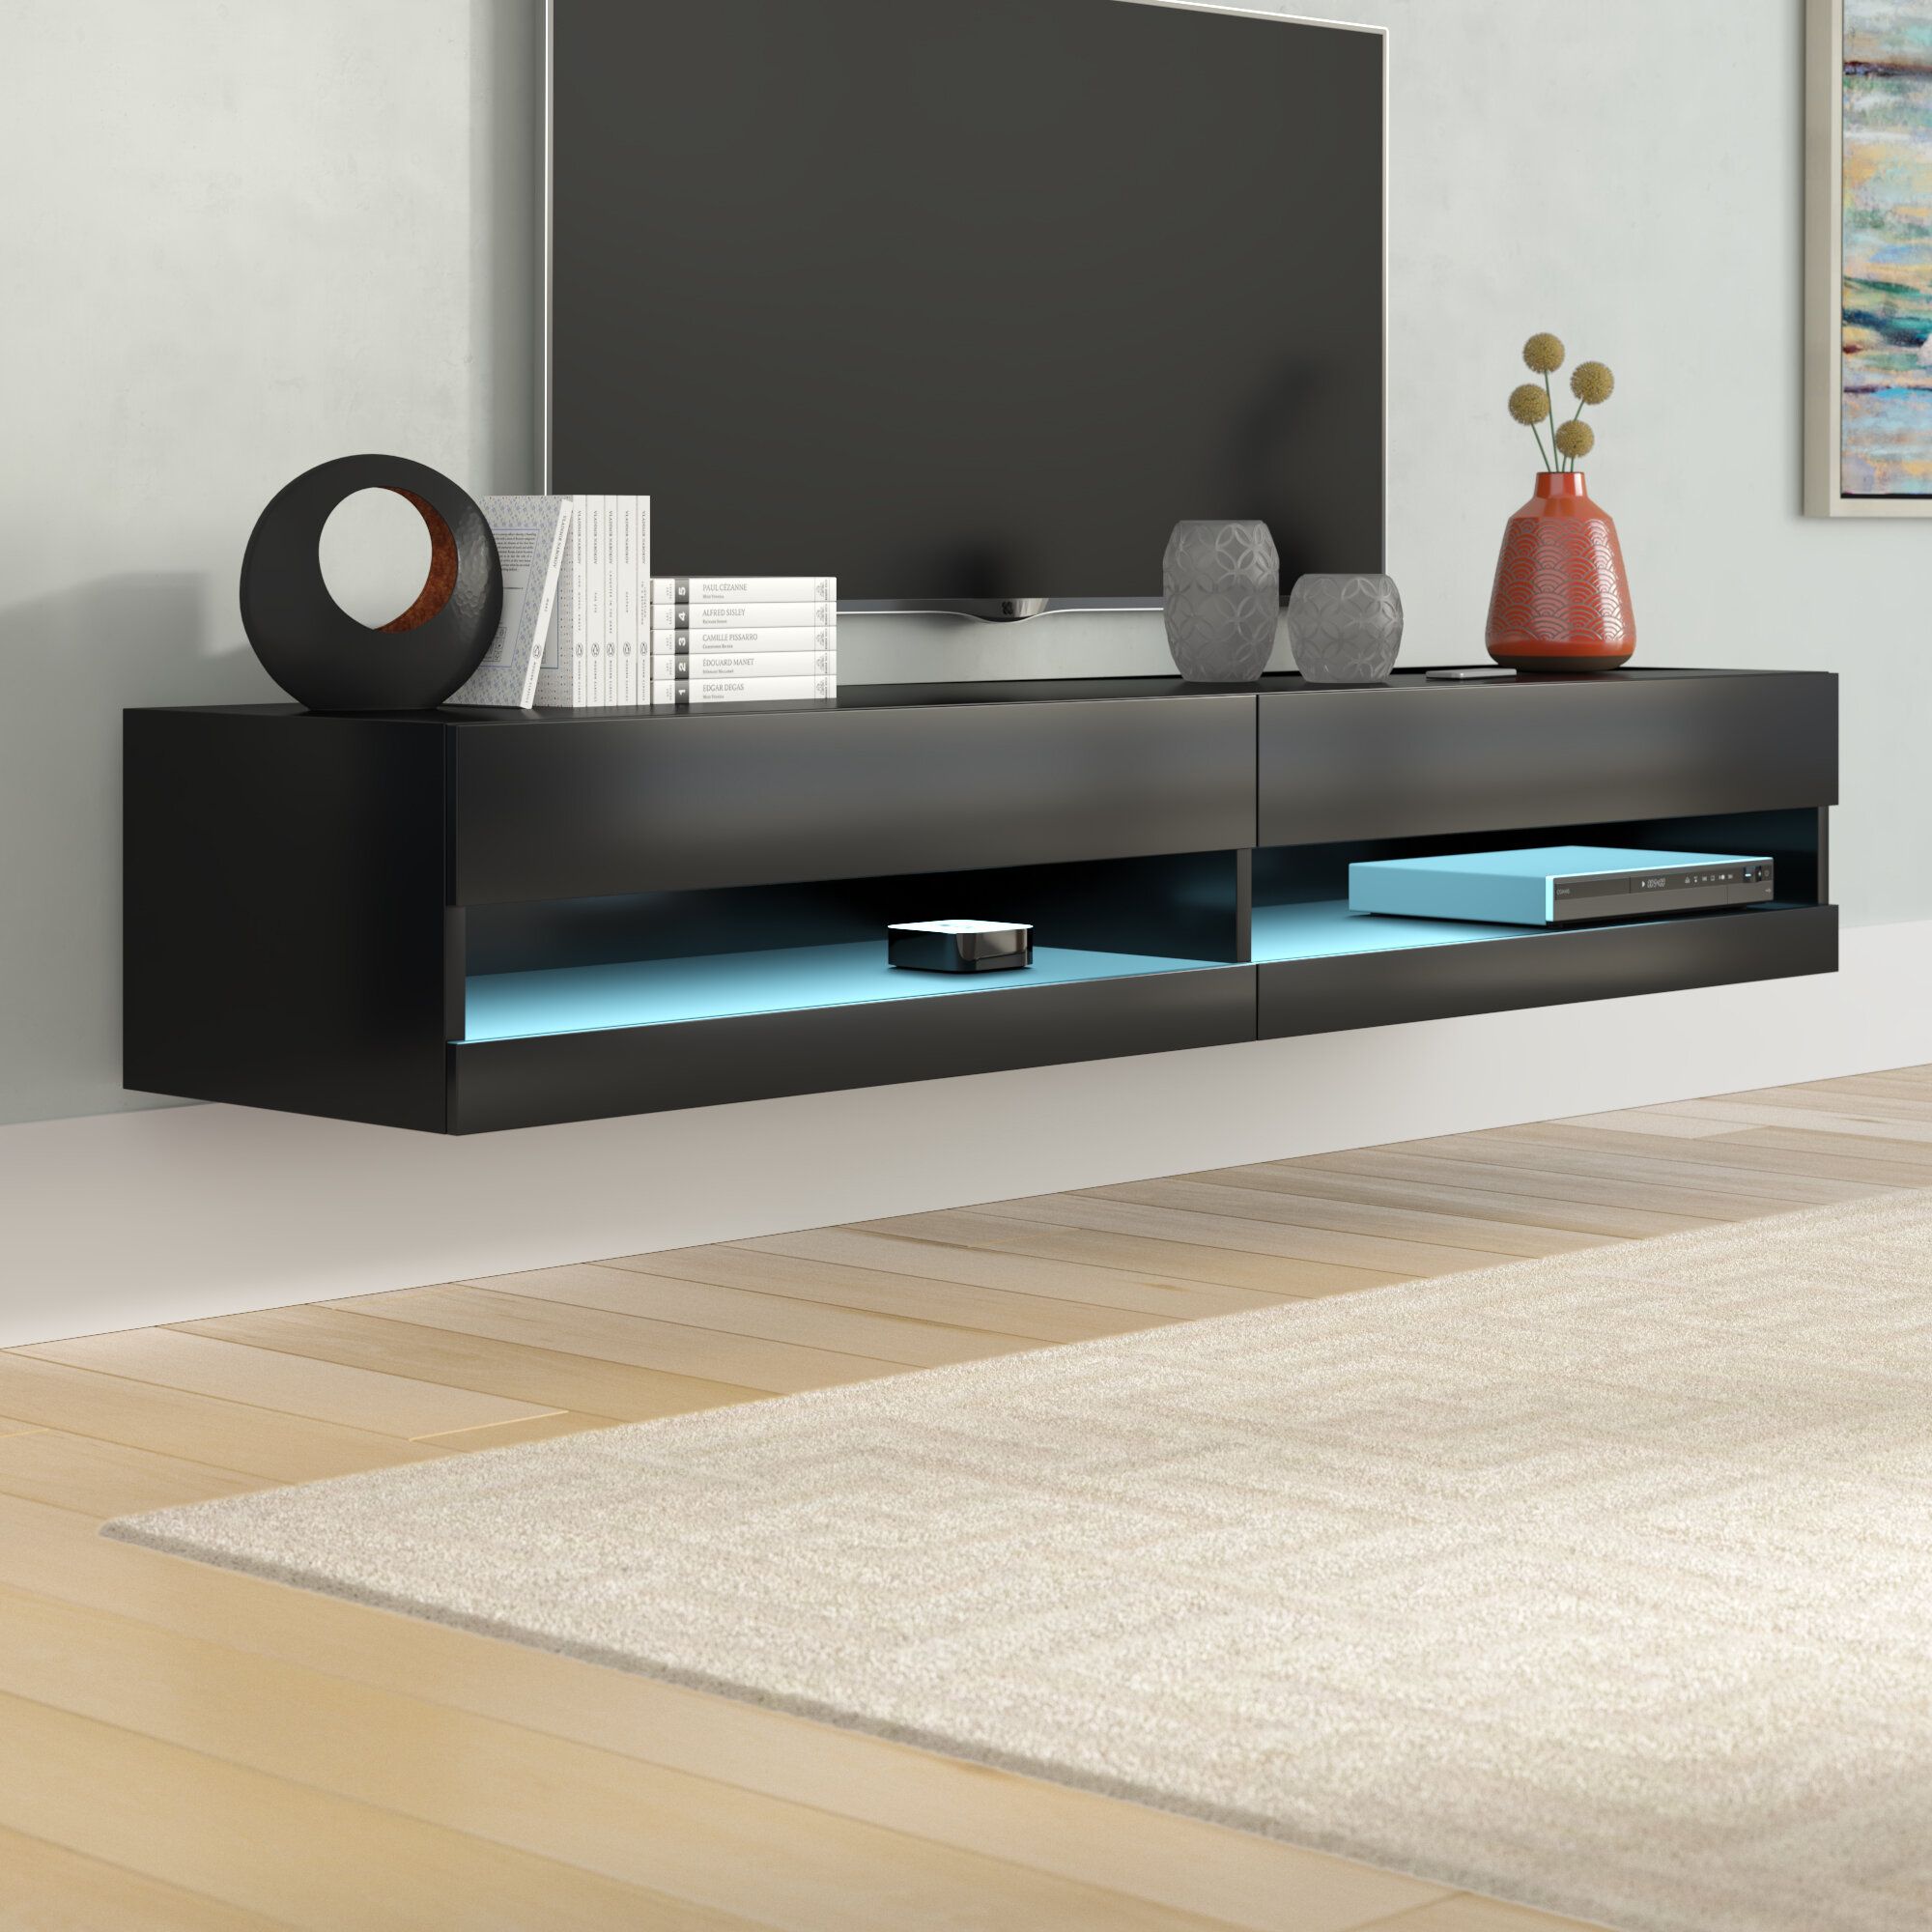 Orren Ellis Ramsdell Floating Tv Stand For Tvs Up To 78" & Reviews | Wayfair In Floating Stands For Tvs (View 2 of 15)